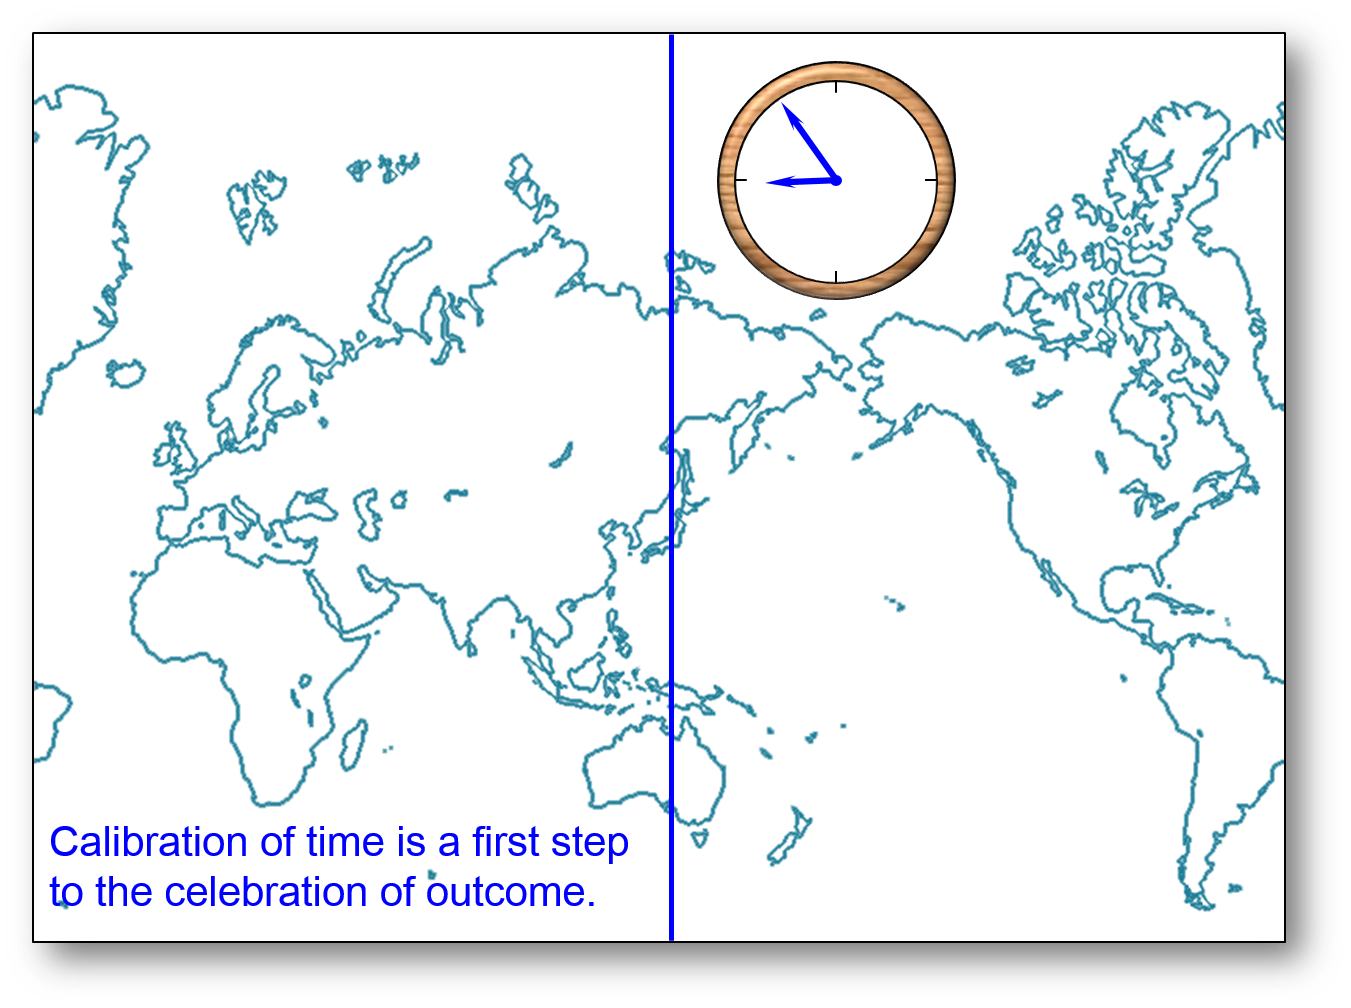 Calibration of time is a first step to the celebration of outcome.